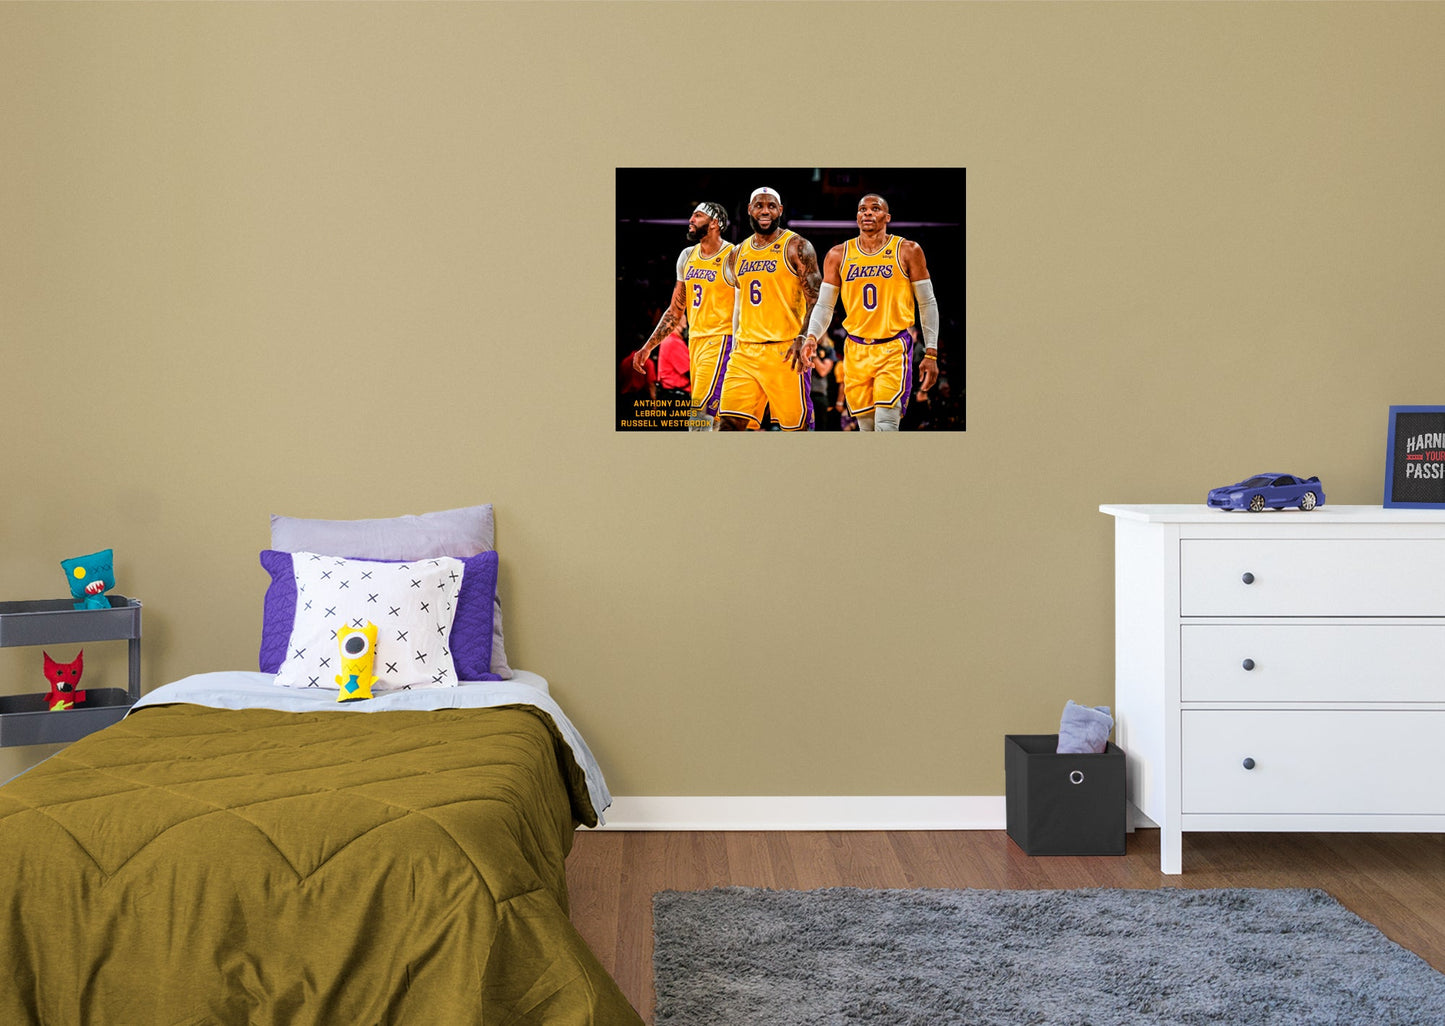 Los Angeles Lakers: Anthony Davis, LeBron James, Russell Westbrook Big 3 Poster - Officially Licensed NBA Removable Adhesive Decal